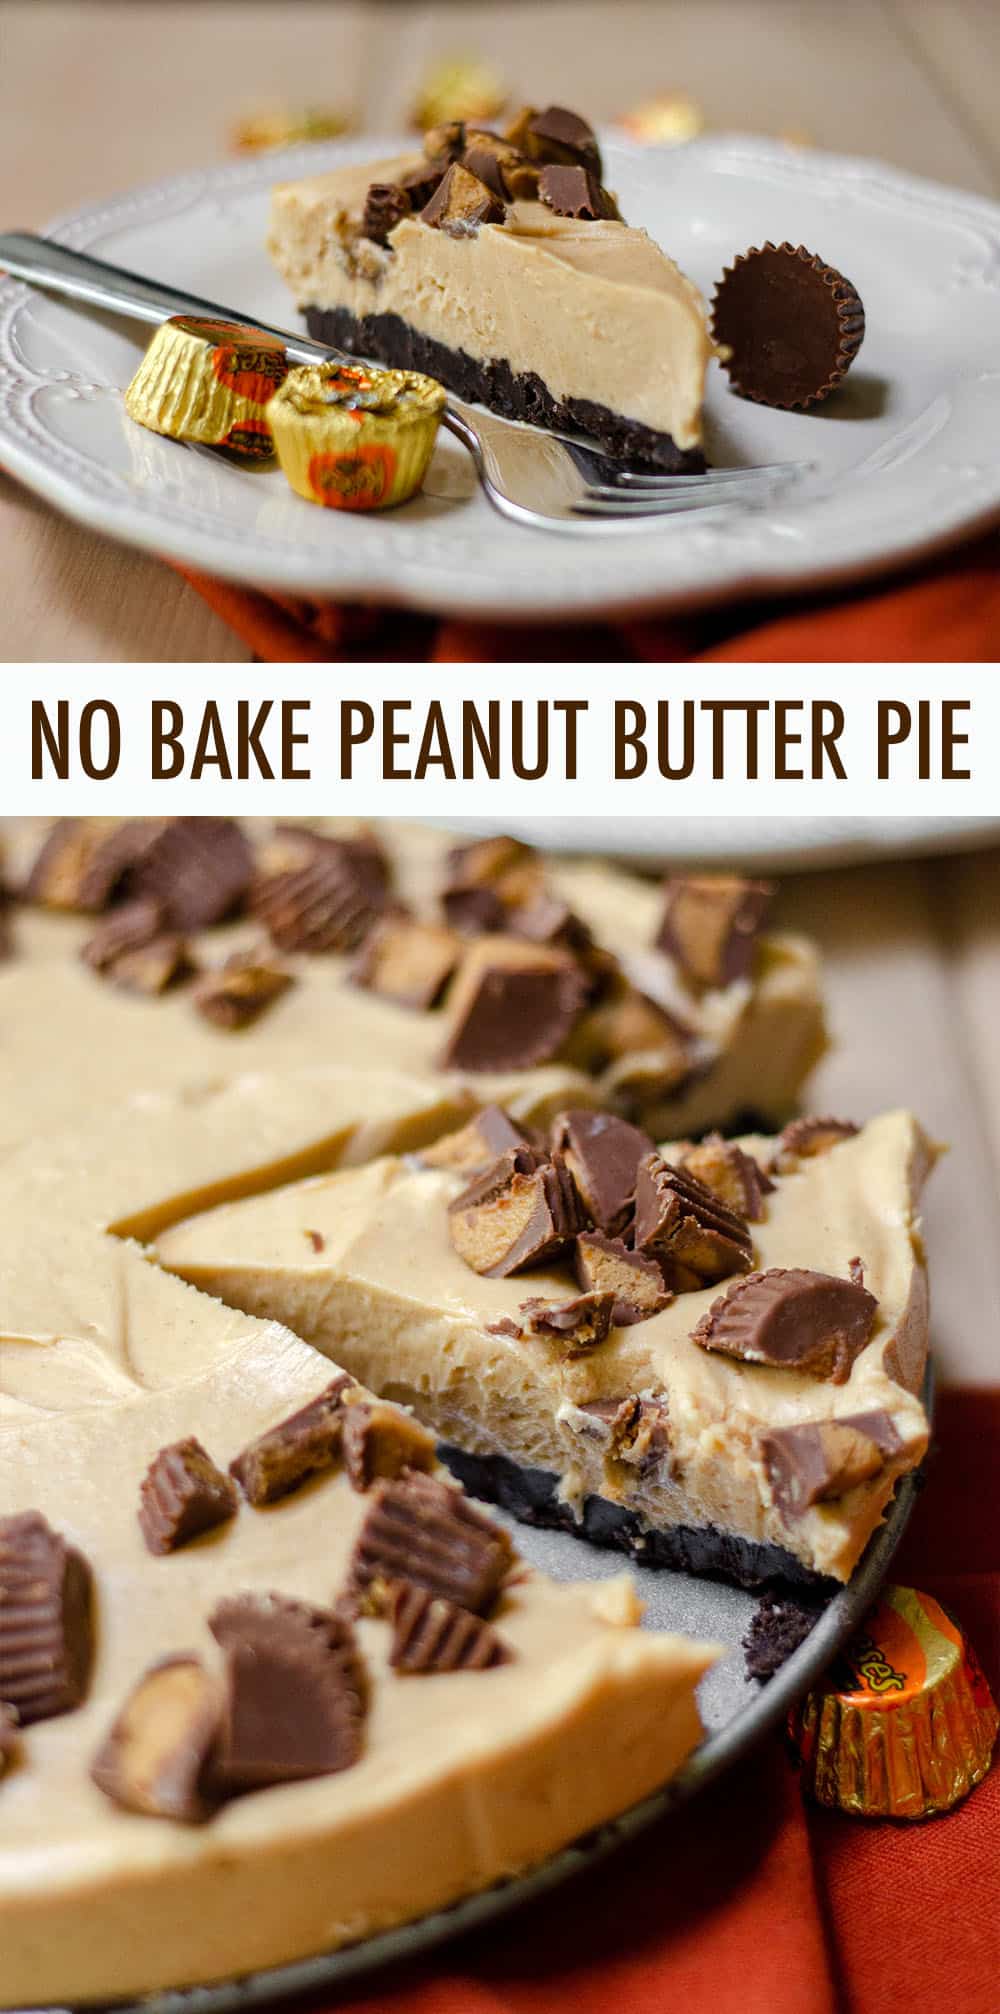 A light and creamy peanut butter filling atop a crushed Oreo crust. The chopped peanut butter cups on top seal the deal for a perfect no bake pie! via @frshaprilflours